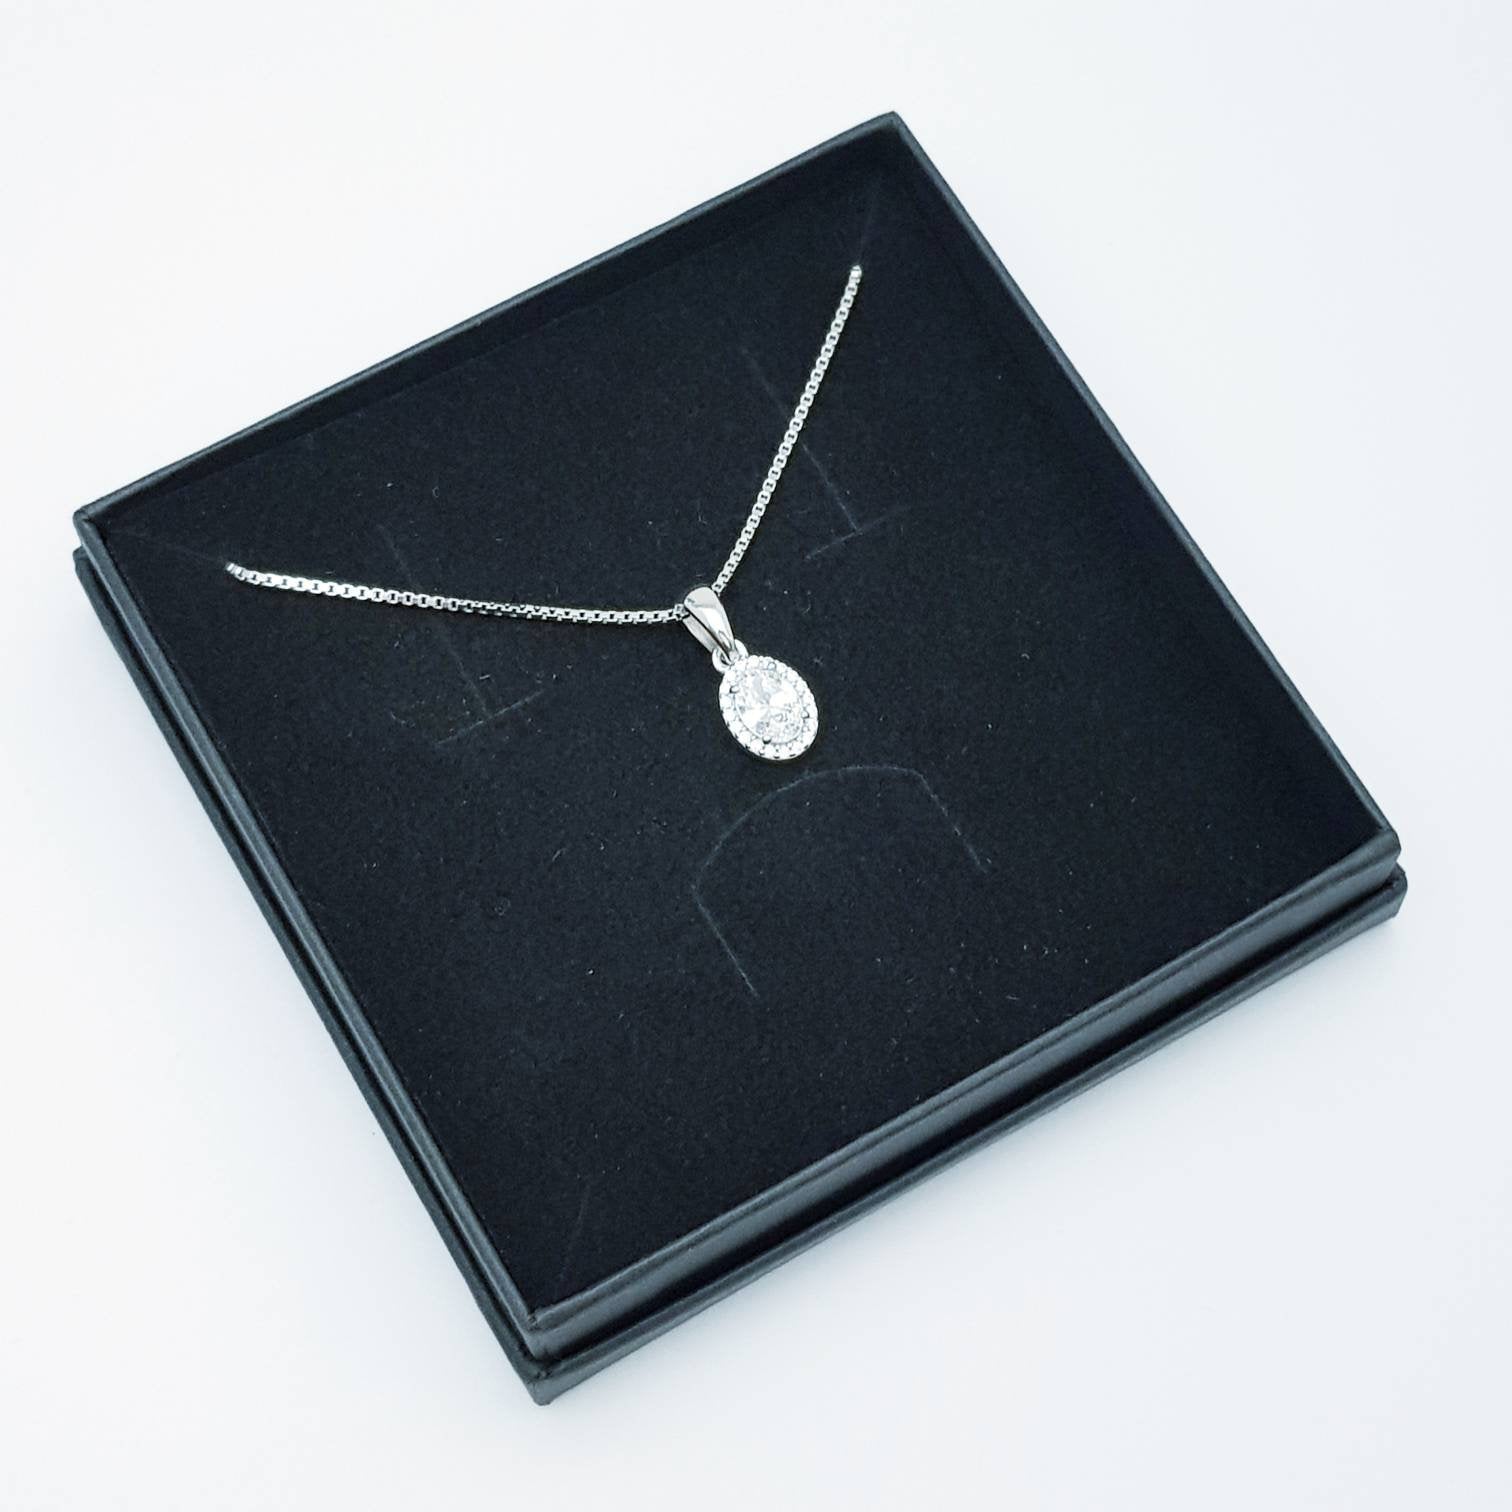 Dainty sterling silver necklace, small white diamond simulant pendant, Vintage necklace, small oval pendant